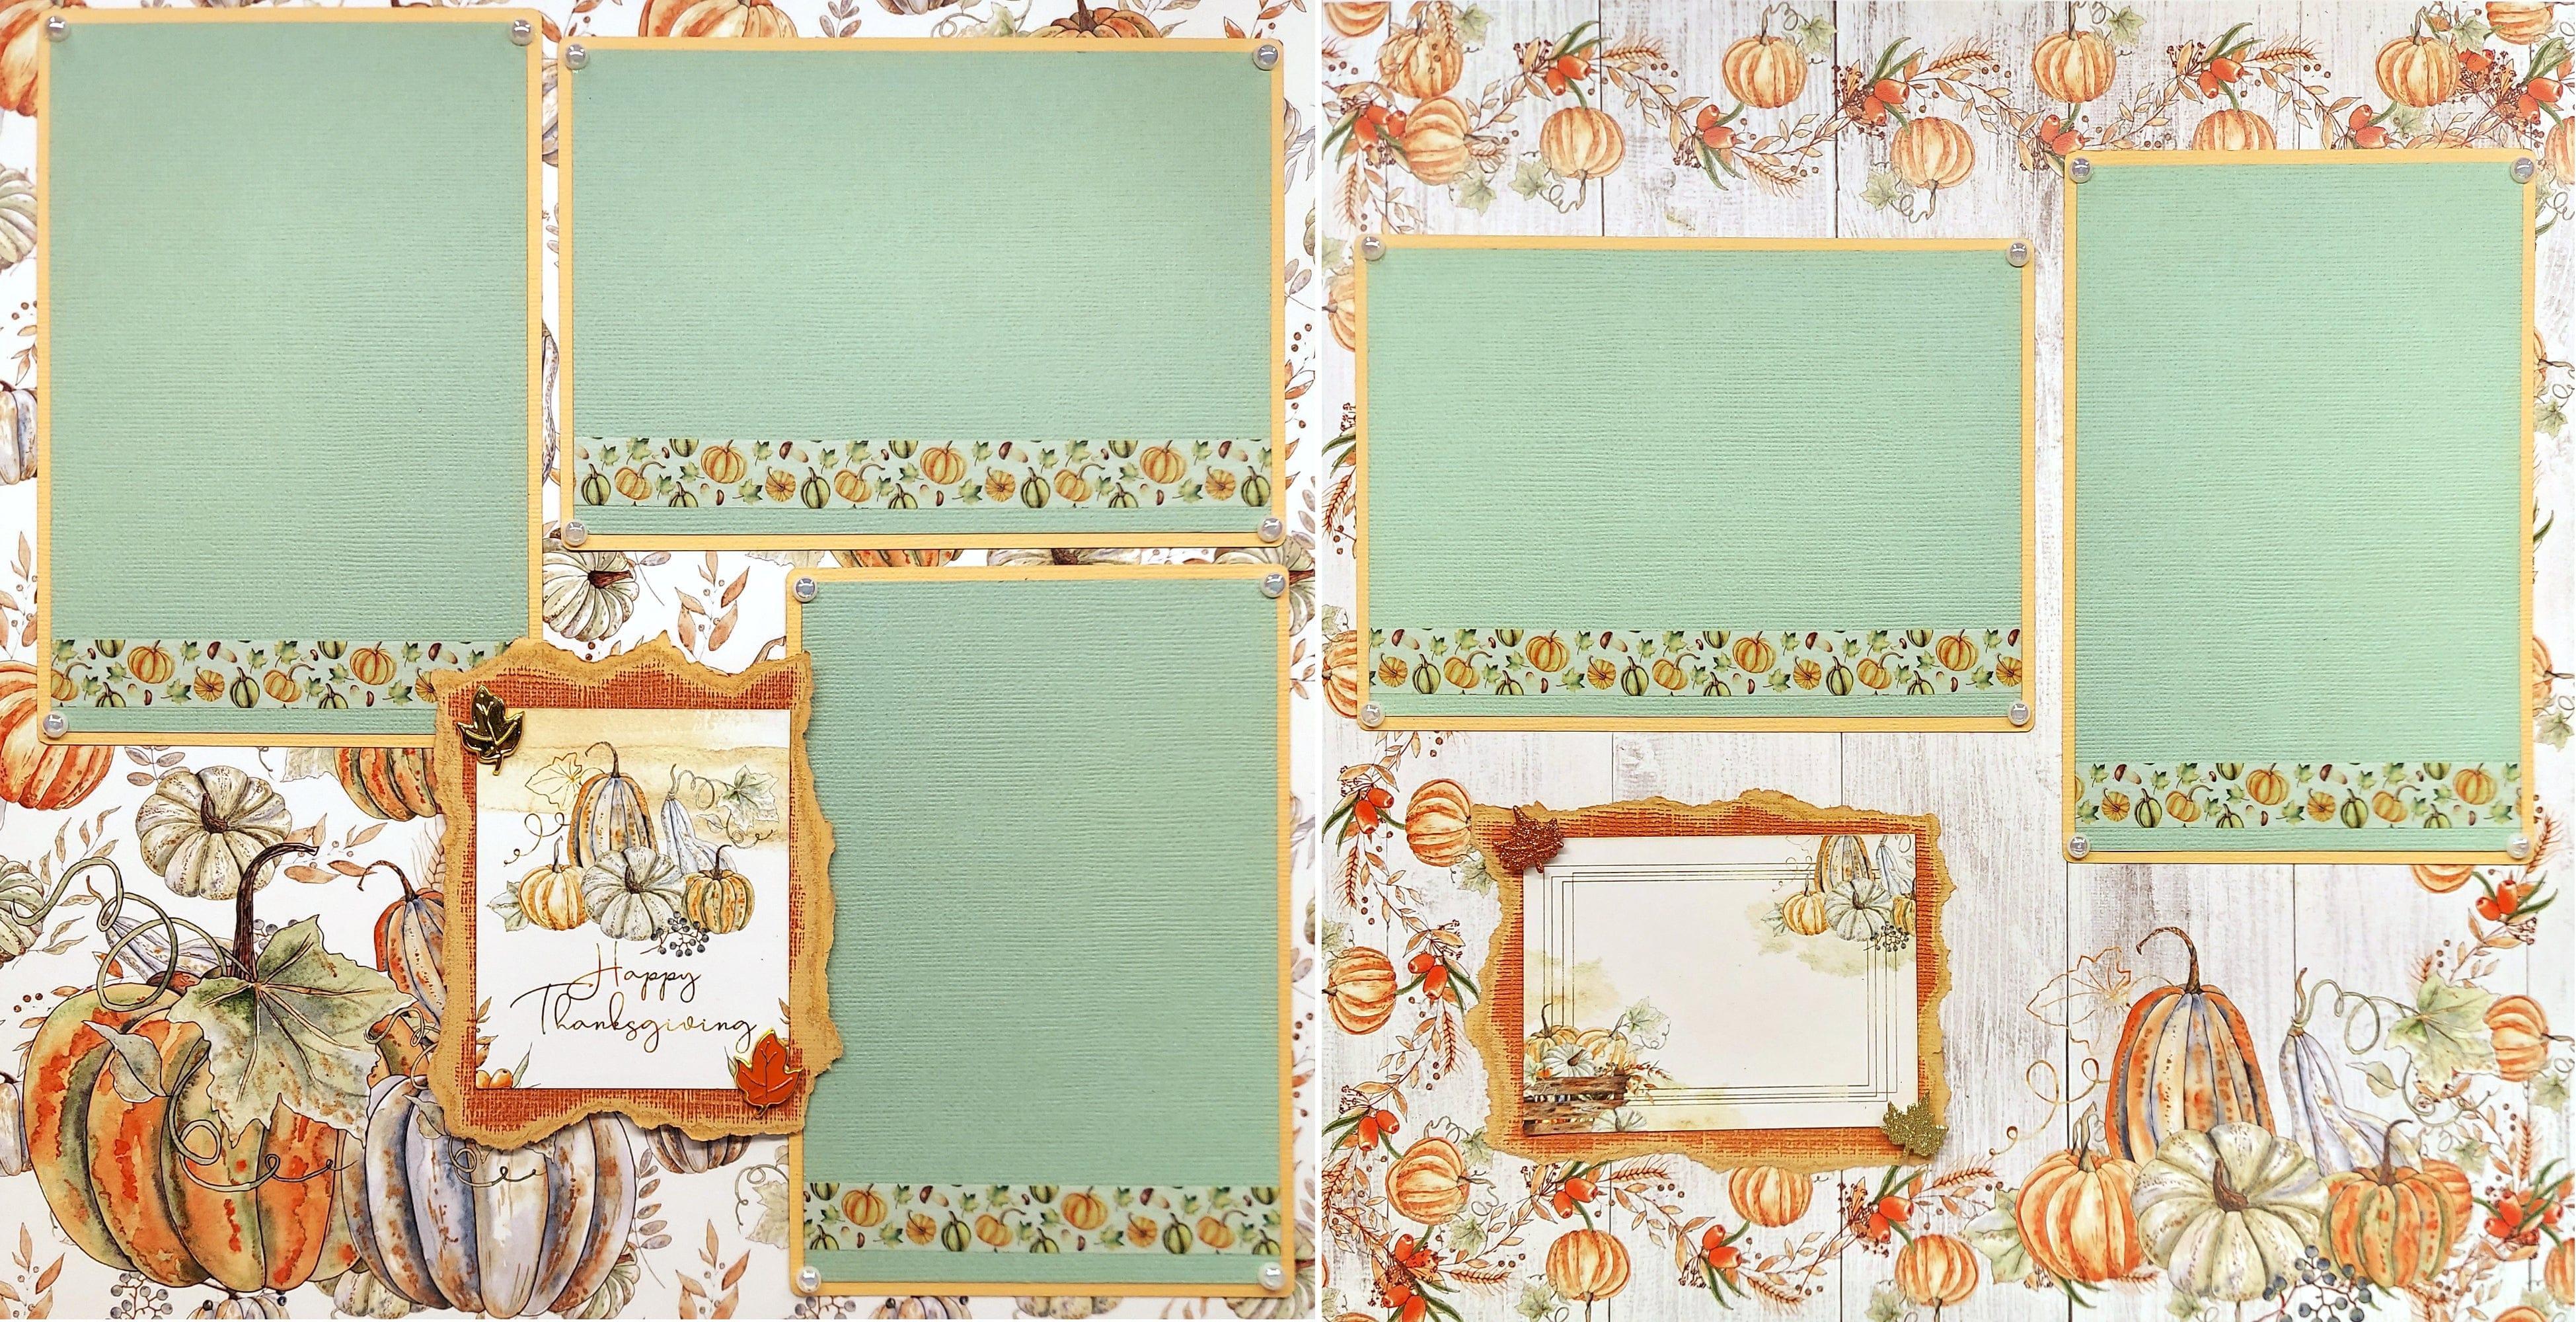 Pumpkin Patch Collection Happy Thanksgiving 2 - 12 x 12 Premade, Hand-Embellished Scrapbook Premades by SSC Designs